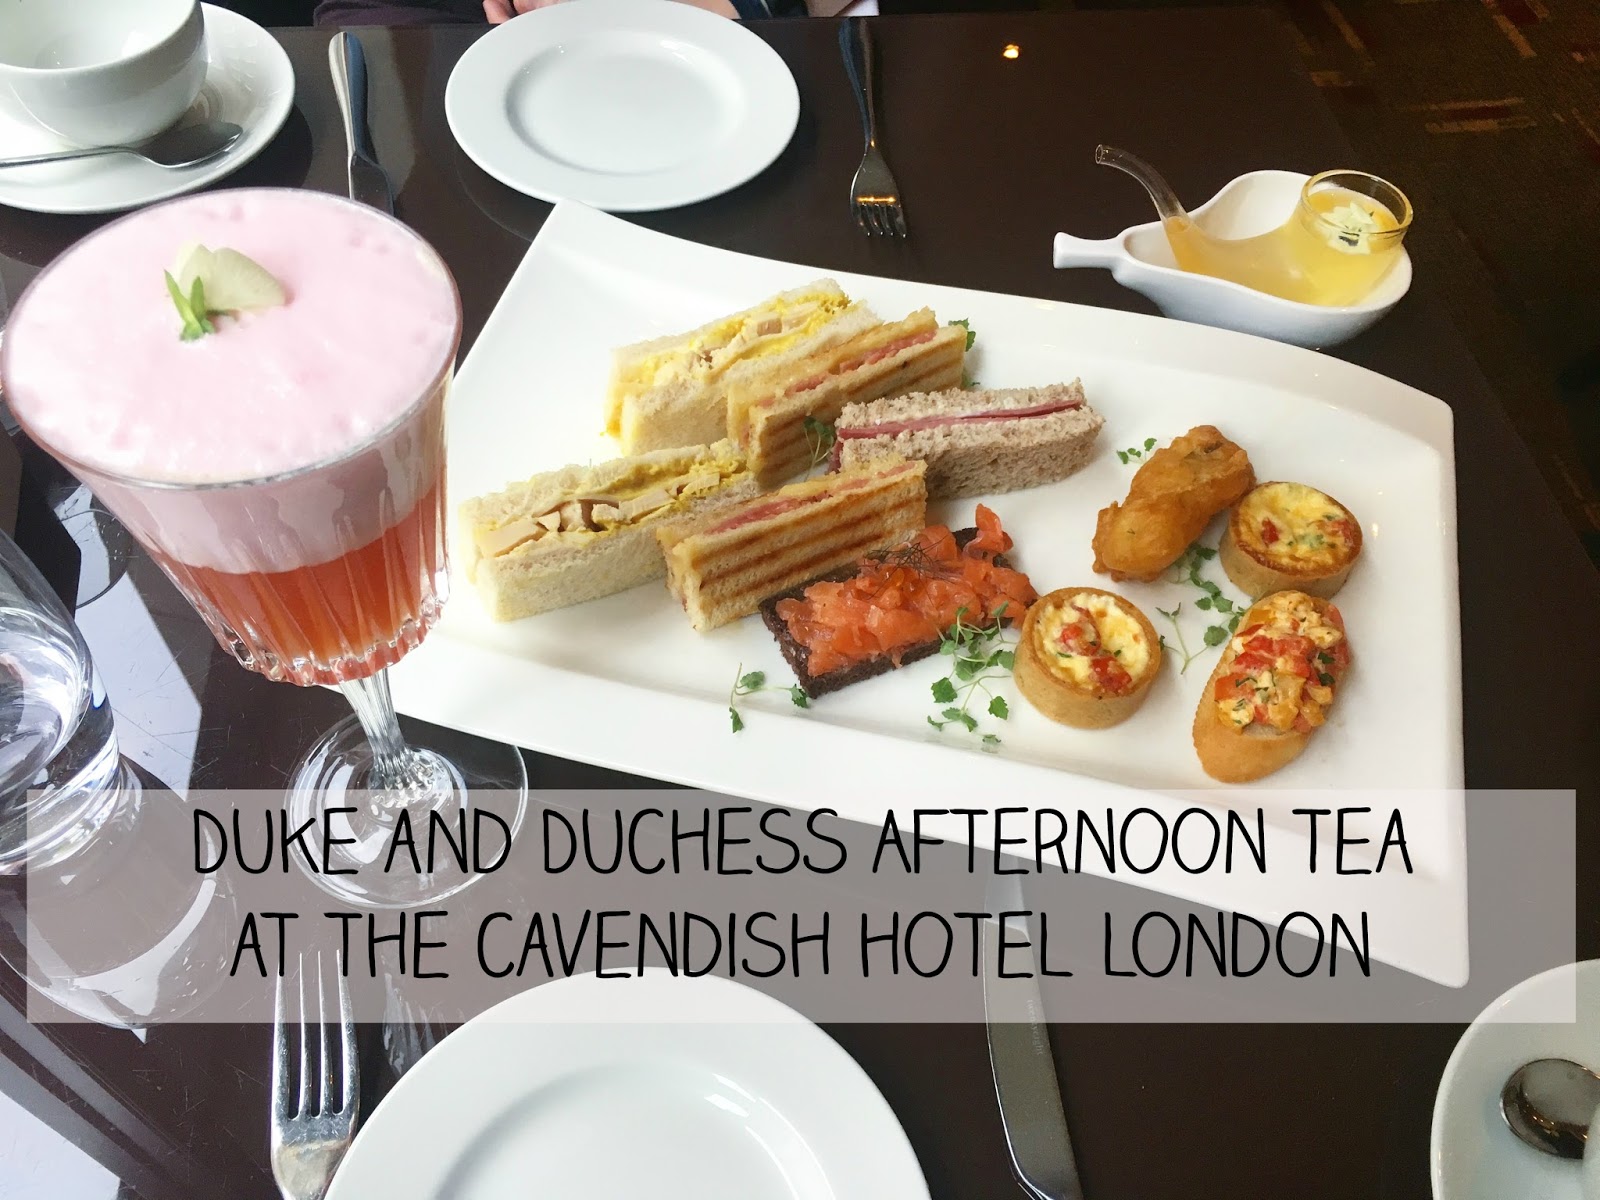 Afternoon Tea at The Cavendish, London